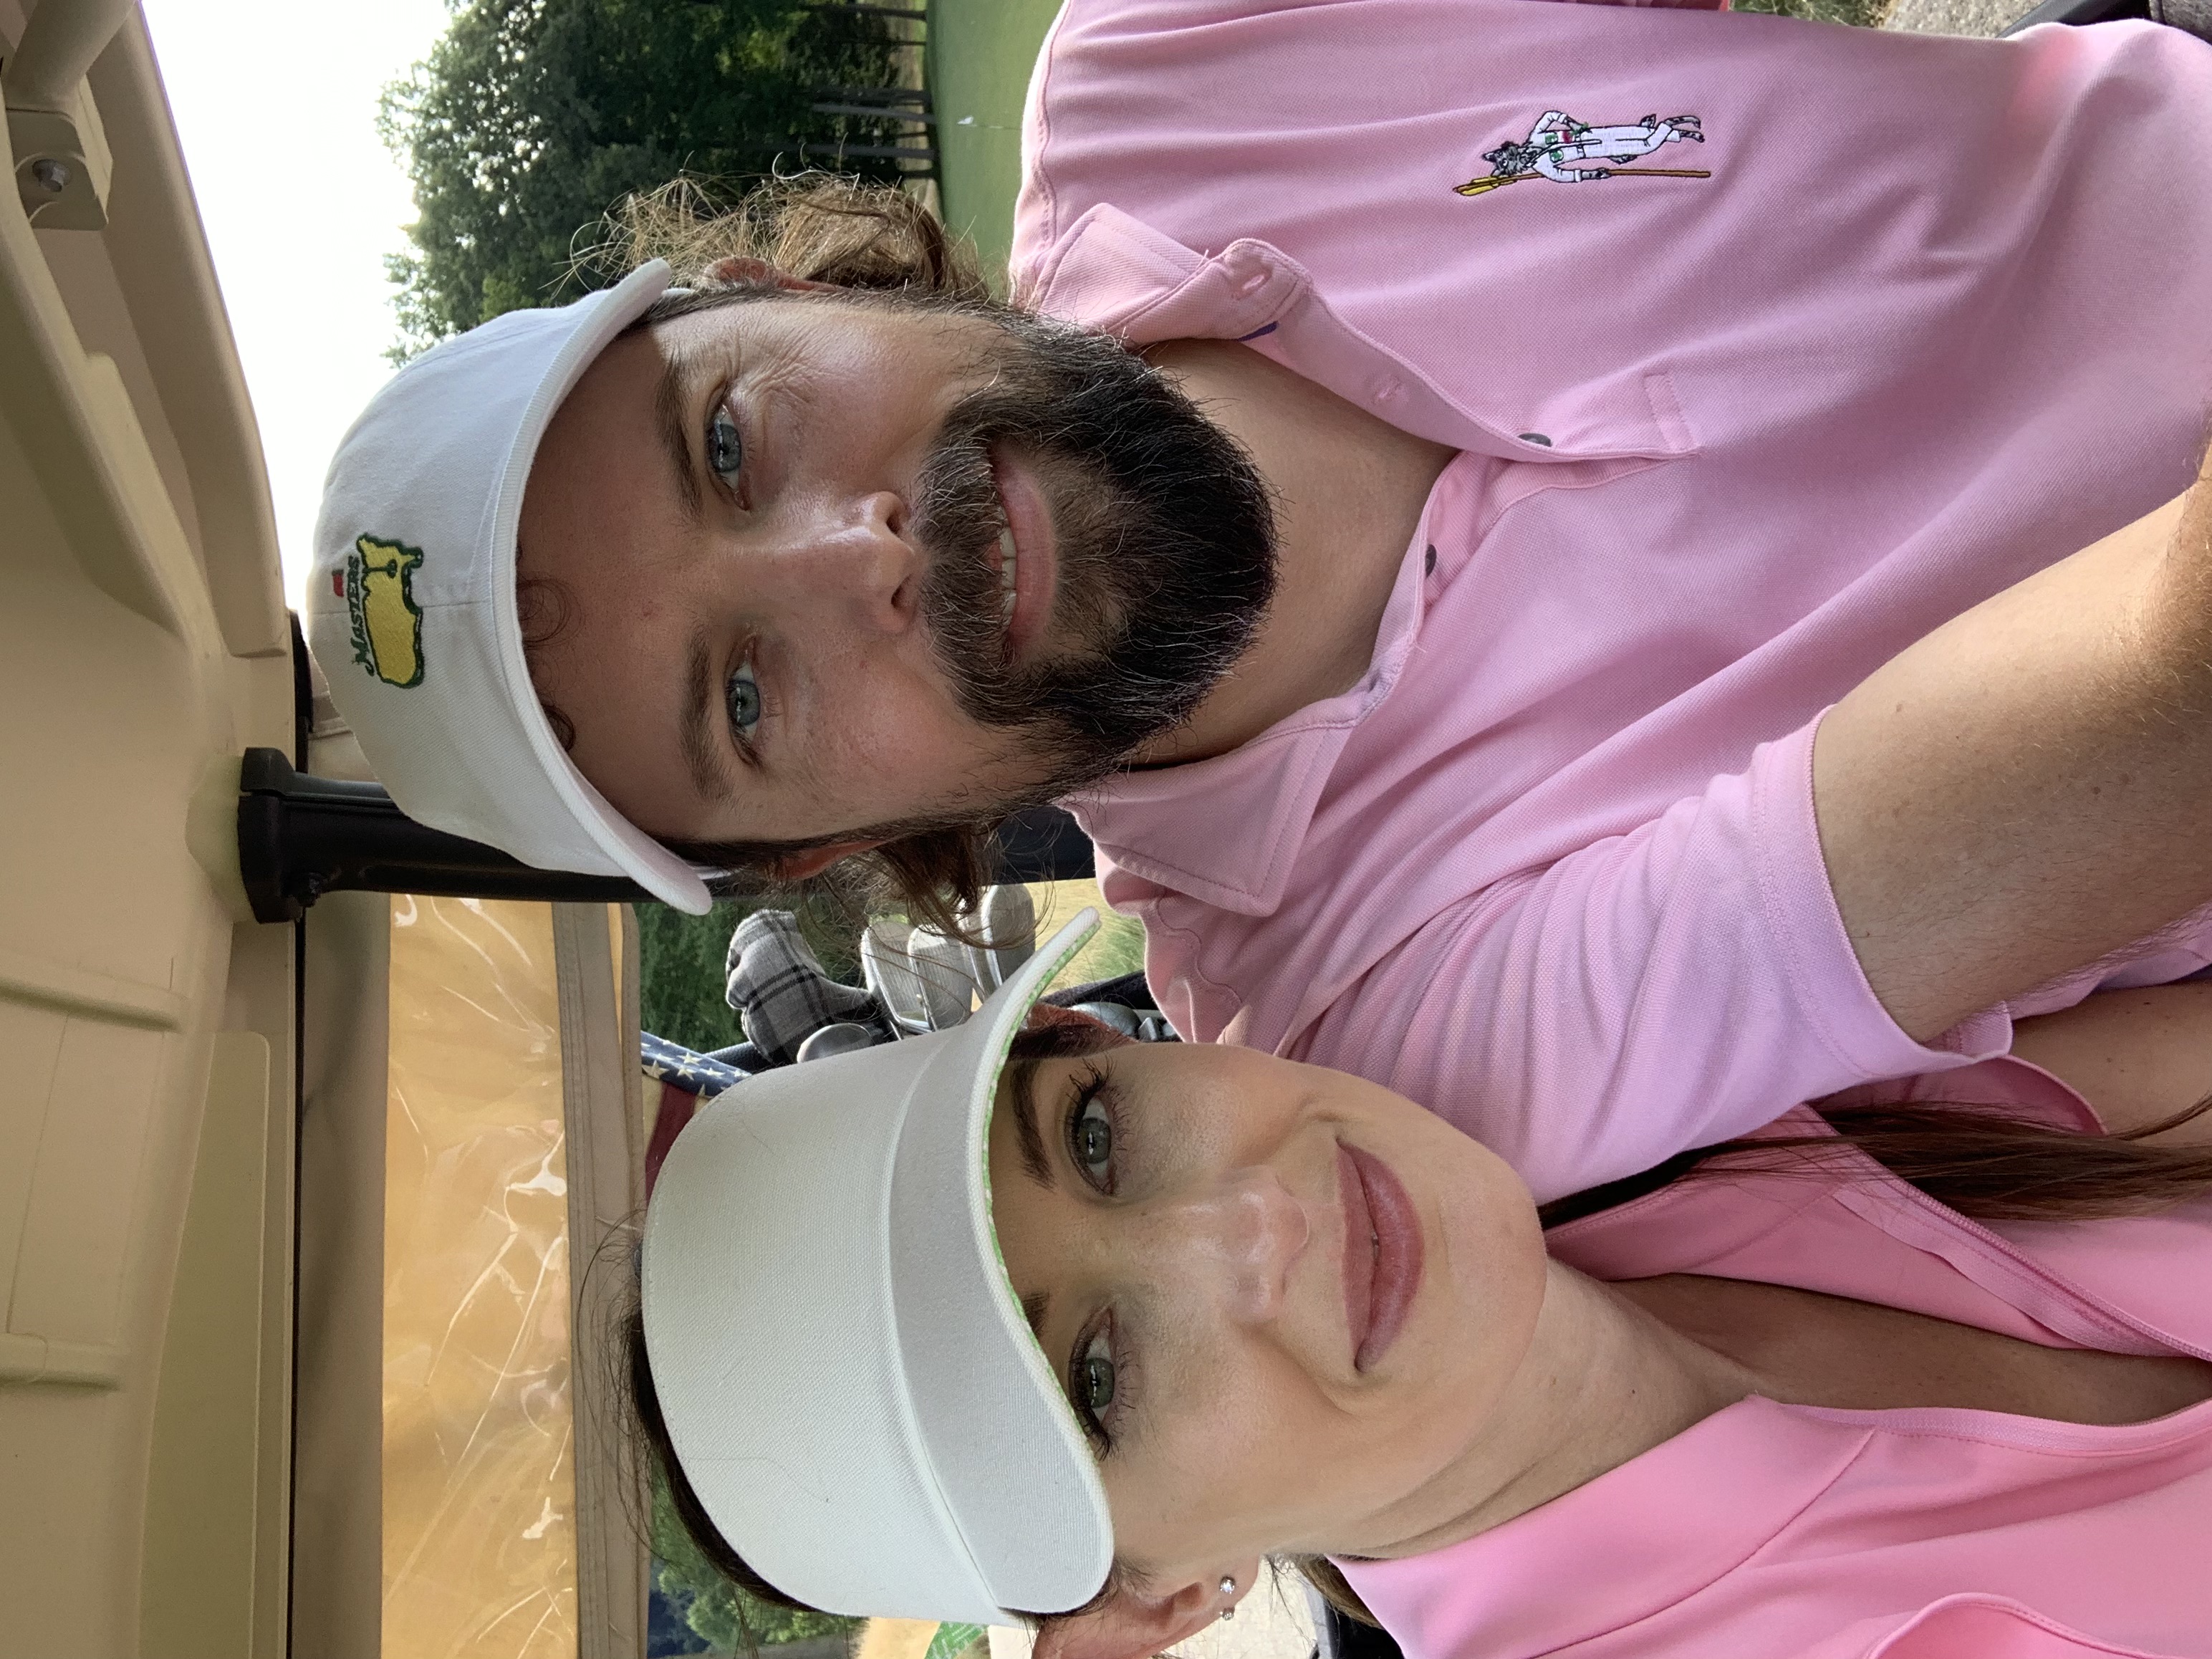 Tom Uebler has golfed since around the age of 12 when he started playing with his father. Uebler and his wife, Cameron, enjoy golfing at Fieldstone Golf Club in northern Delaware.